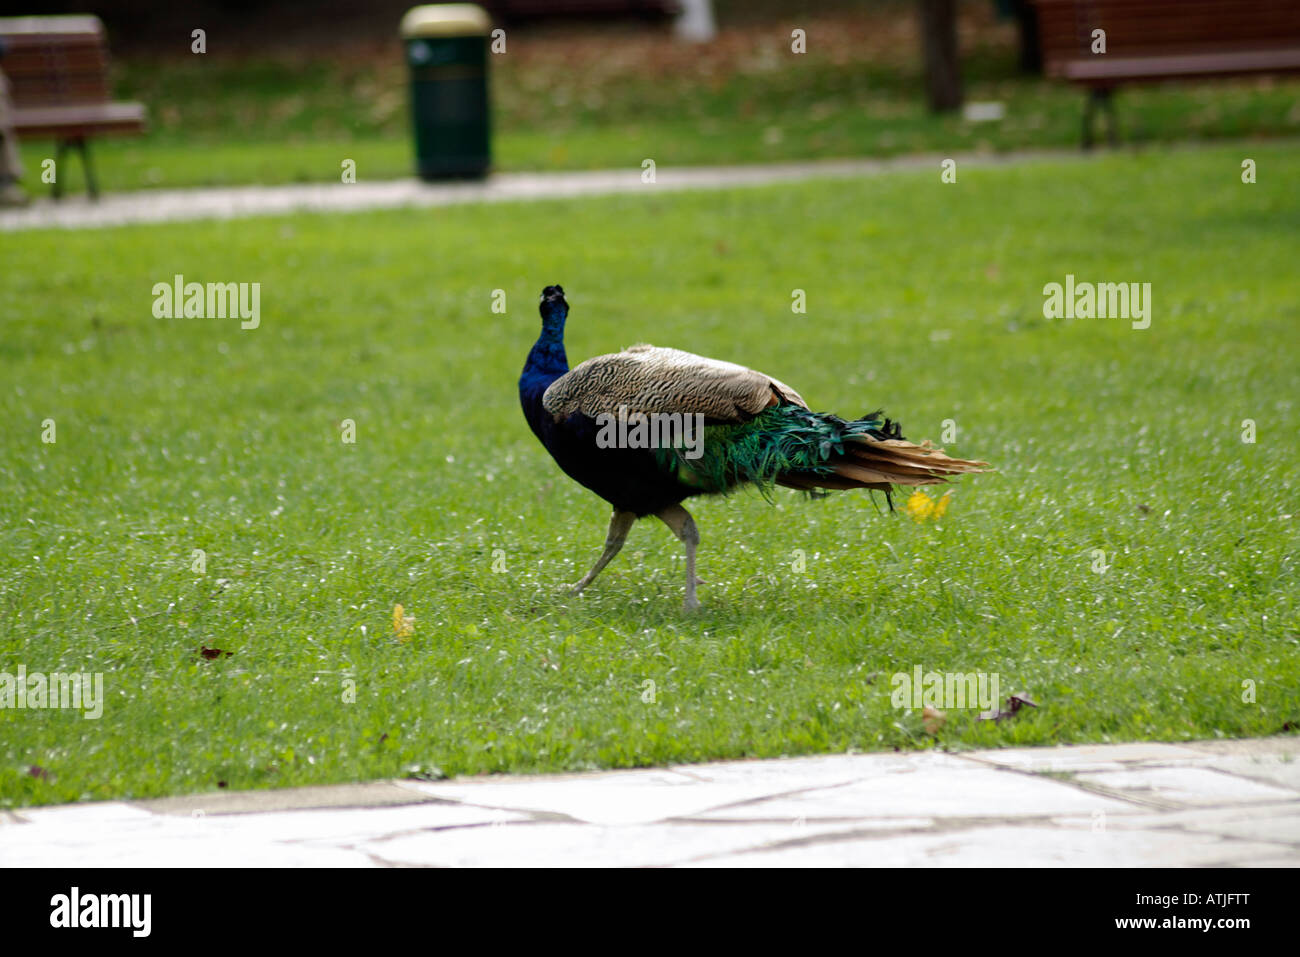 solitary peacock in the park of doña casilda Stock Photo